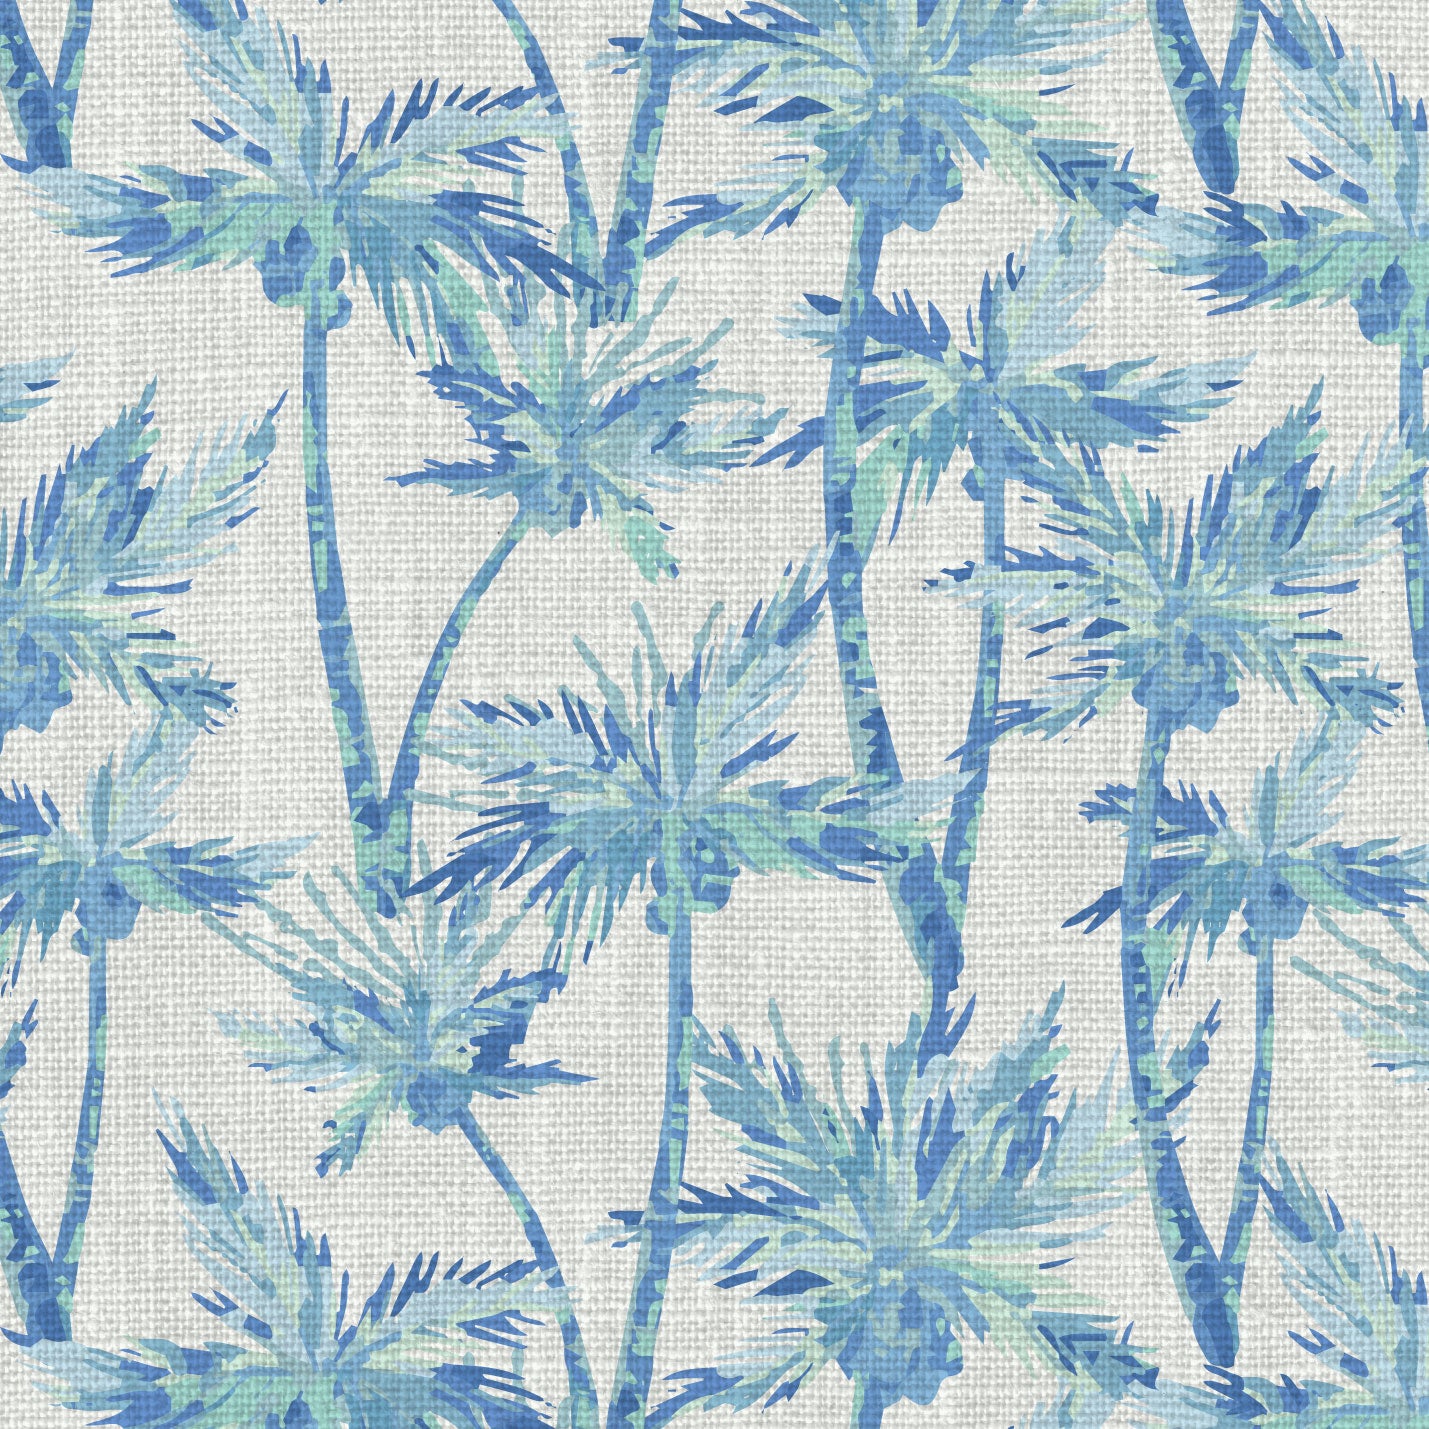 wallpaper Natural Textured Eco-Friendly Non-toxic High-quality Sustainable Interior Design Bold Custom Tailor-made Retro chic Tropical Jungle Coastal Garden Seaside Coastal Seashore Waterfront Vacation home styling Retreat Relaxed beach vibes Beach cottage Shoreline Oceanfront nature palm tree palms tonal cream sand off-white ocean sky surf blue teal linen